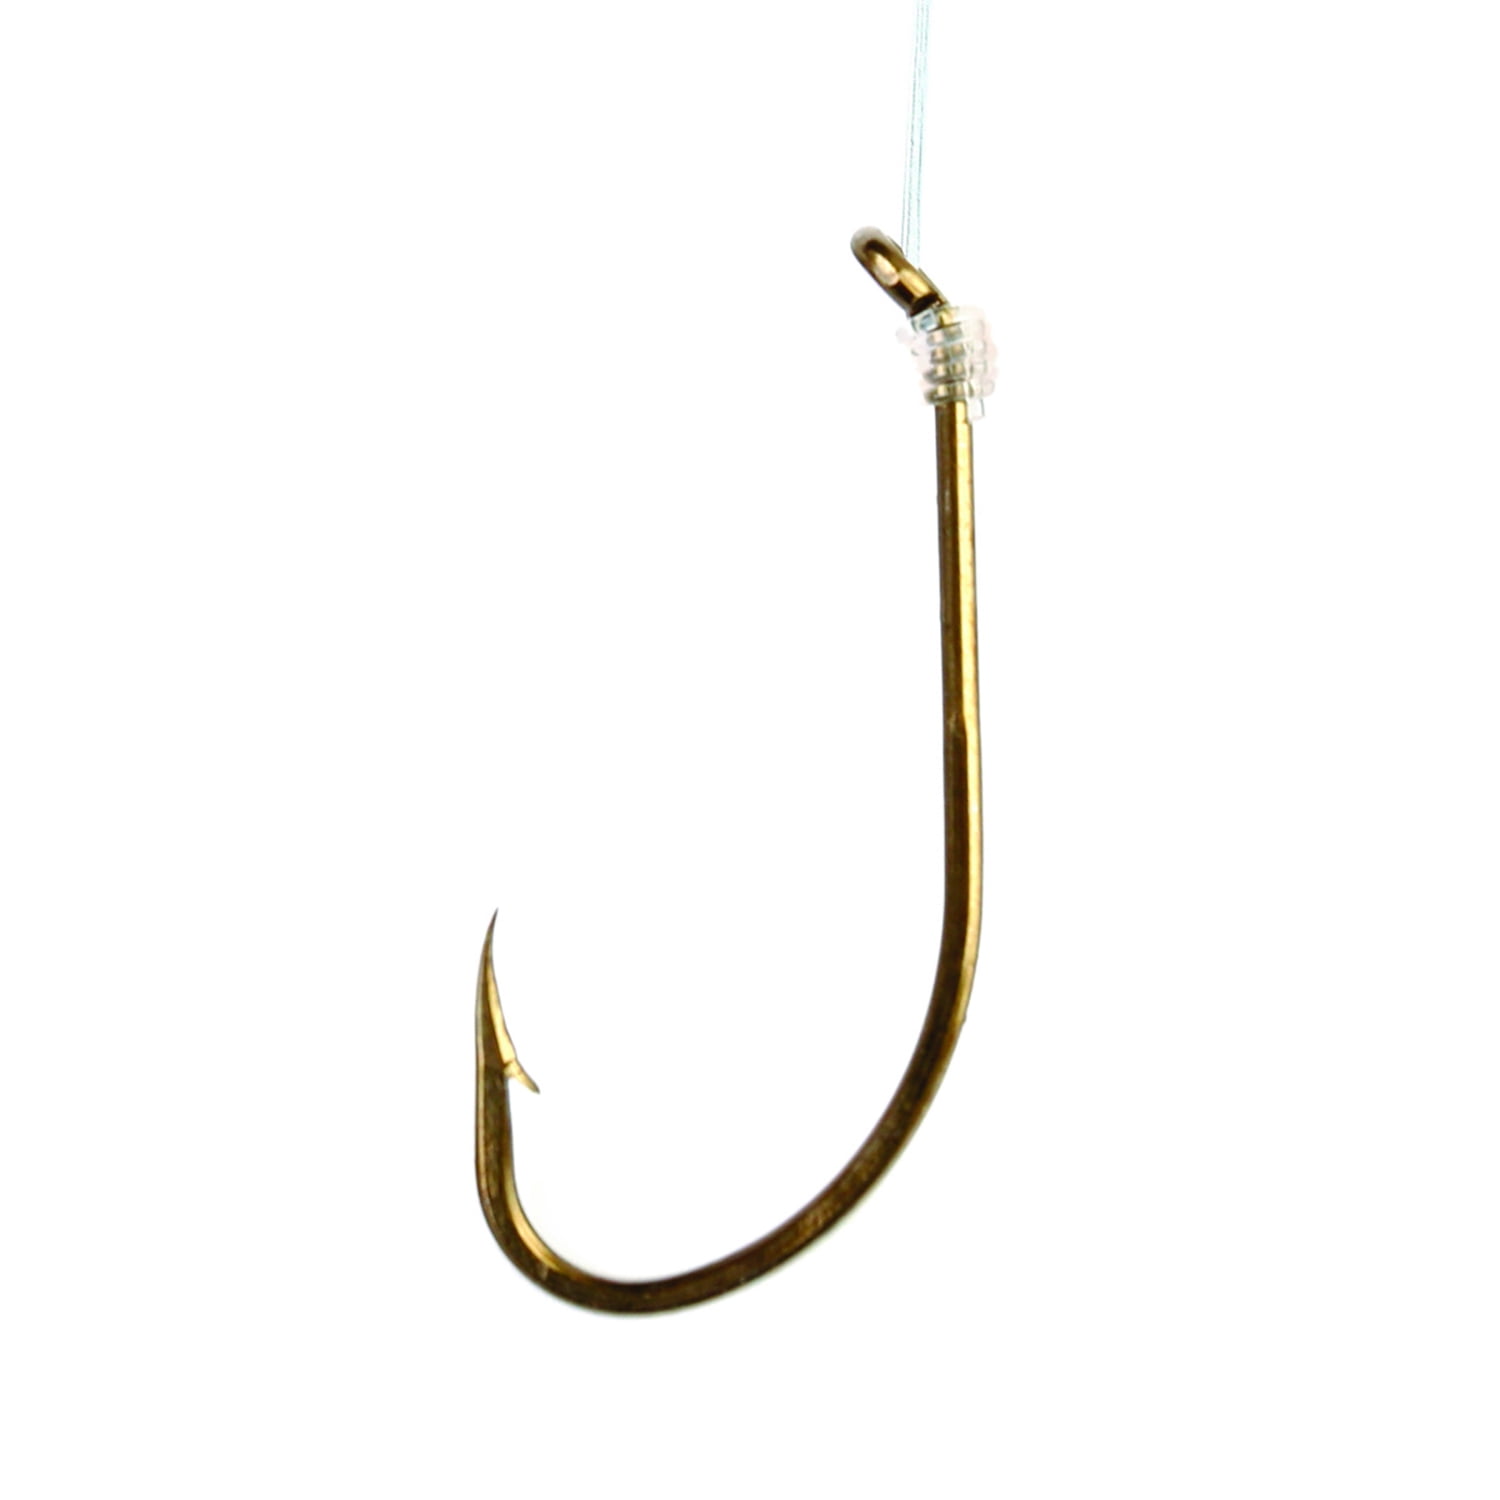 Eagle Claw 031H-6 Plain Shank Snell Fish Hook, Size 6 